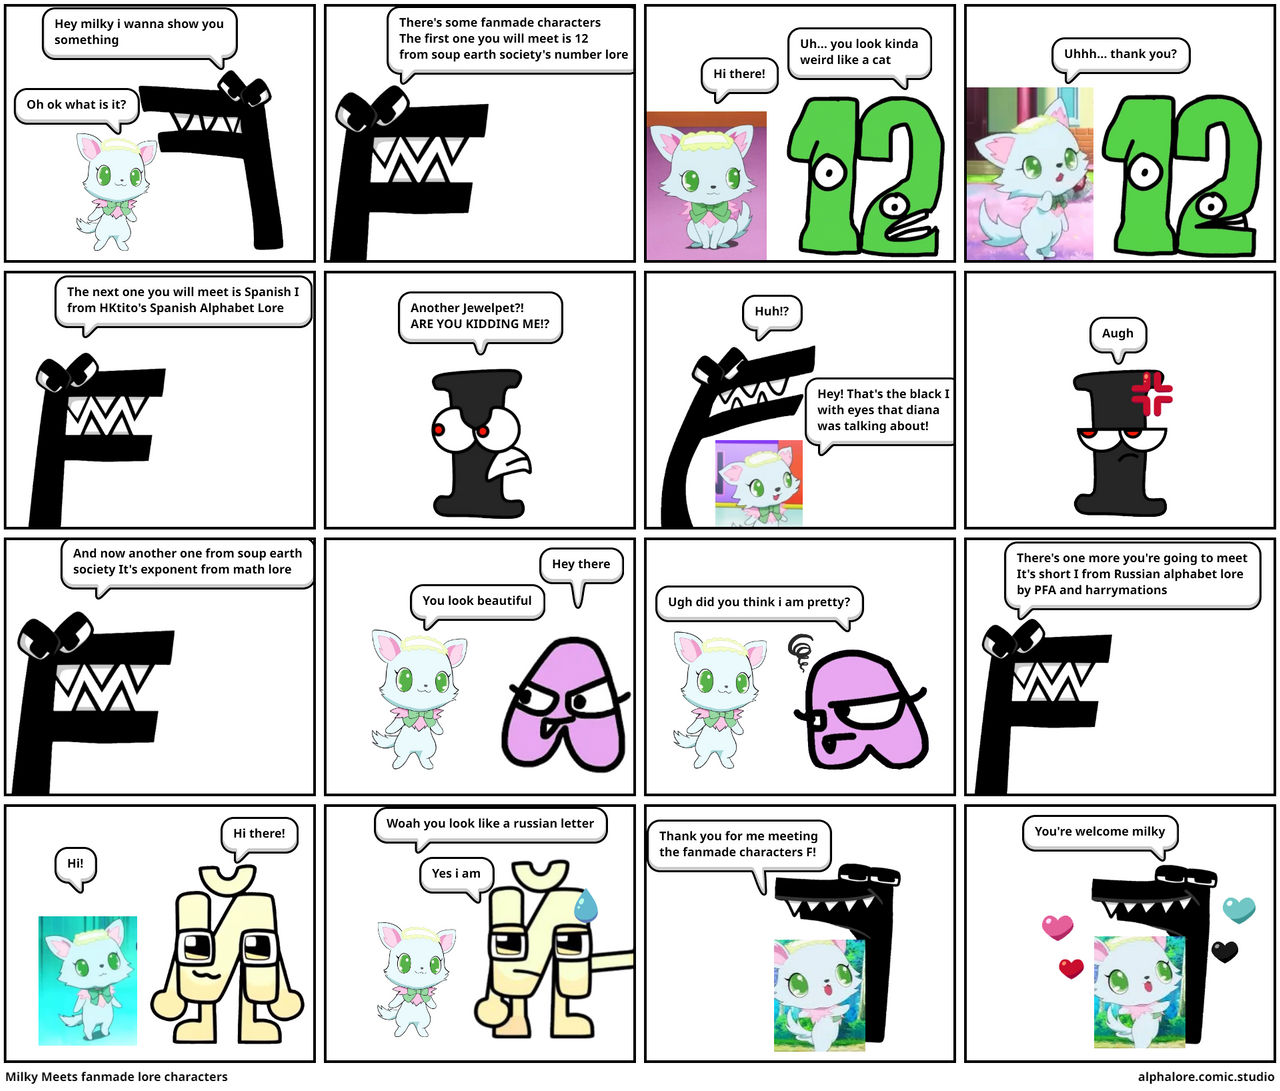 more fanmade bfdi characters by me - Comic Studio